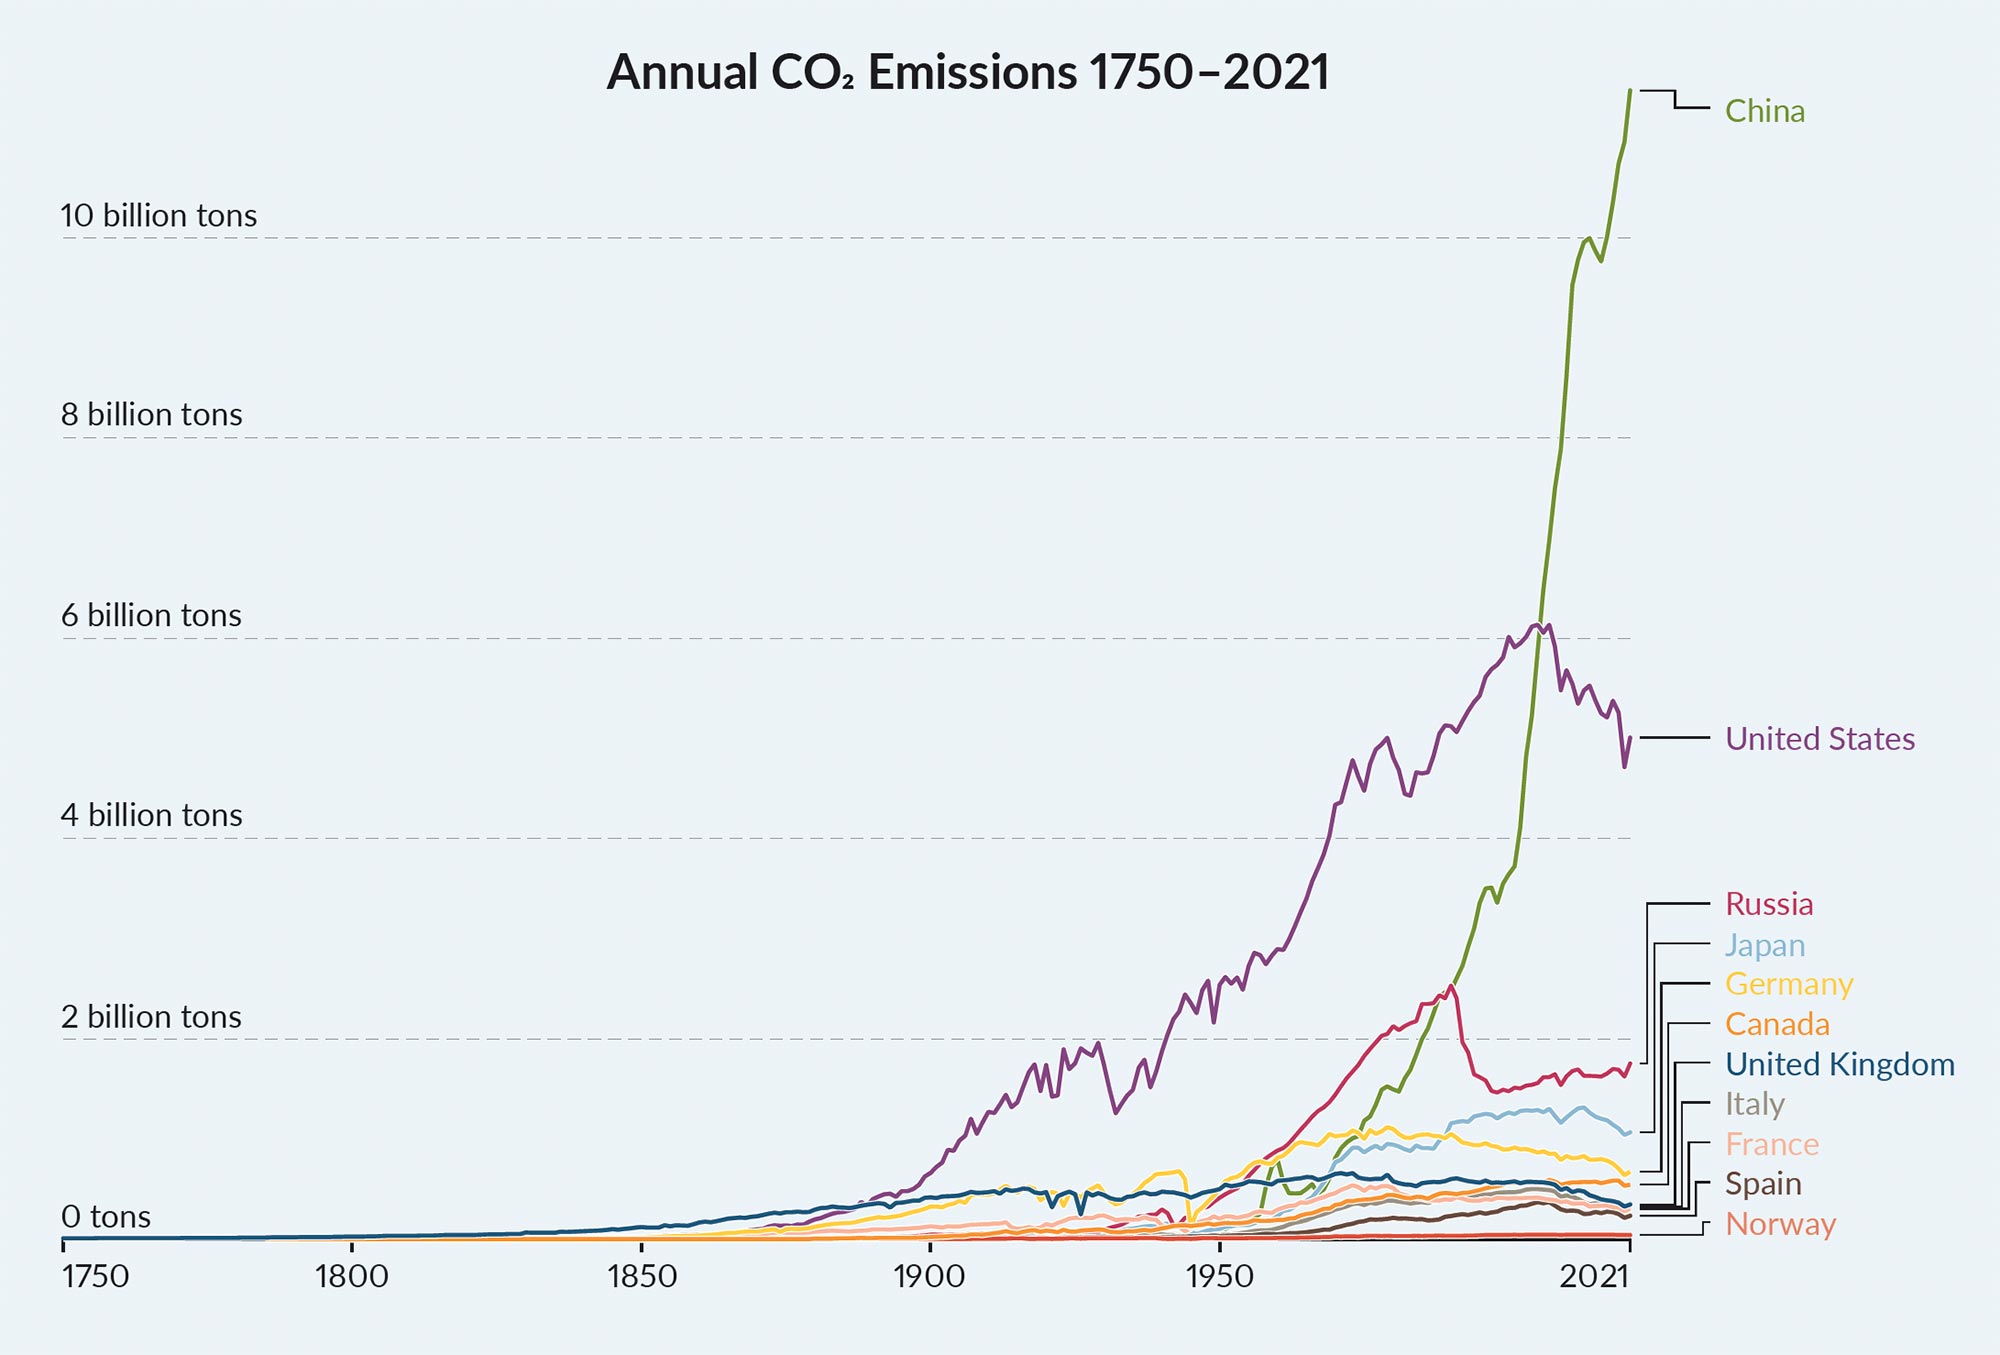 Annual CO2 Emissions 1750-2021